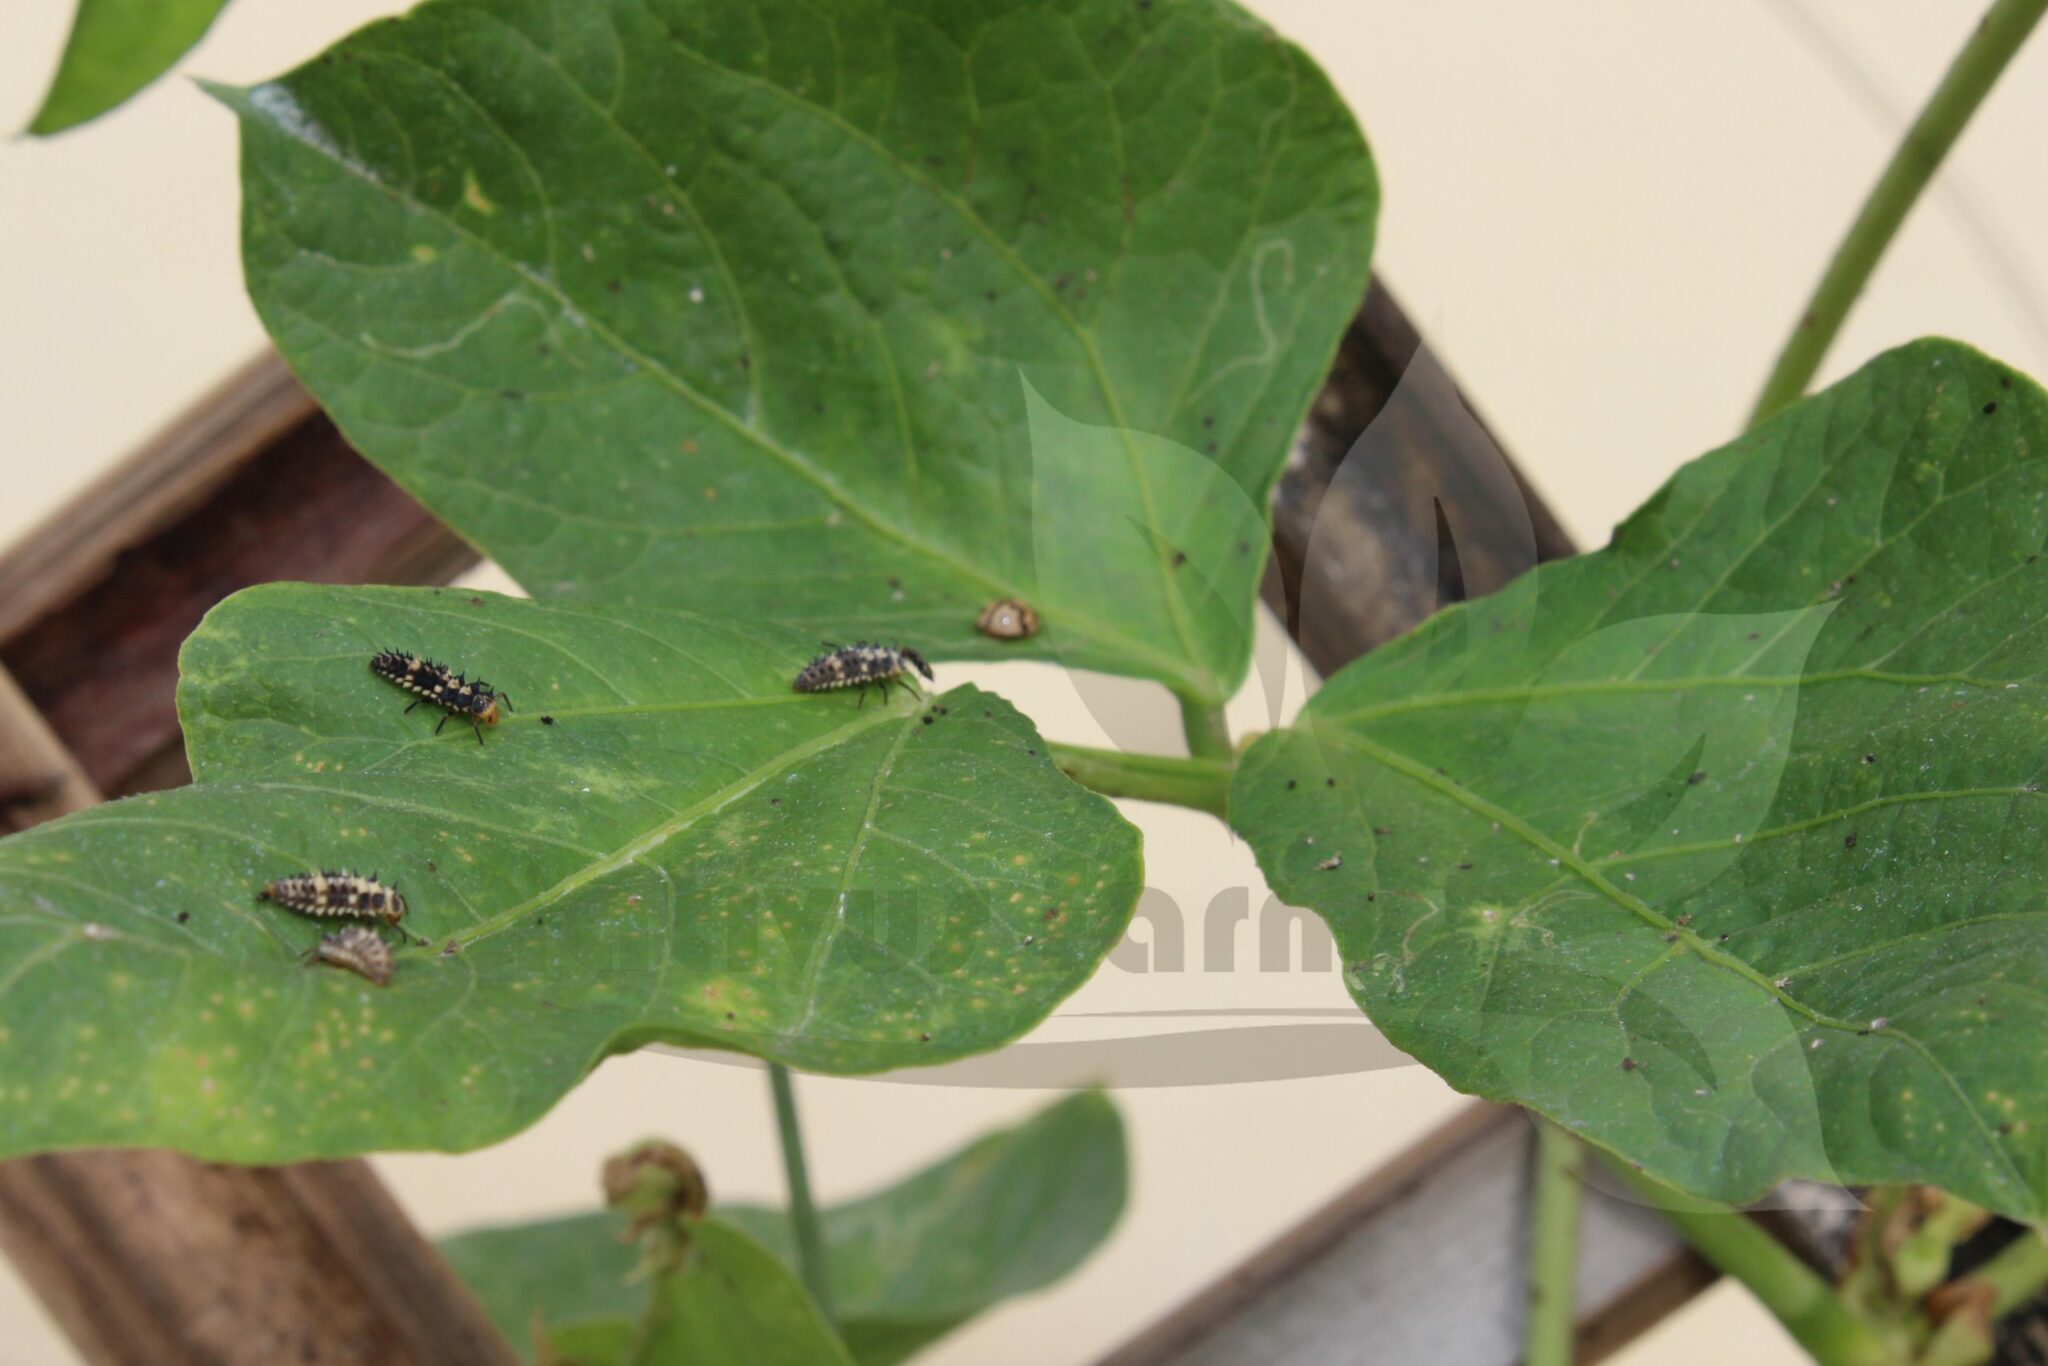 how do ladybugs help gardeners and farmers get rid of pests like aphids and scale bugs